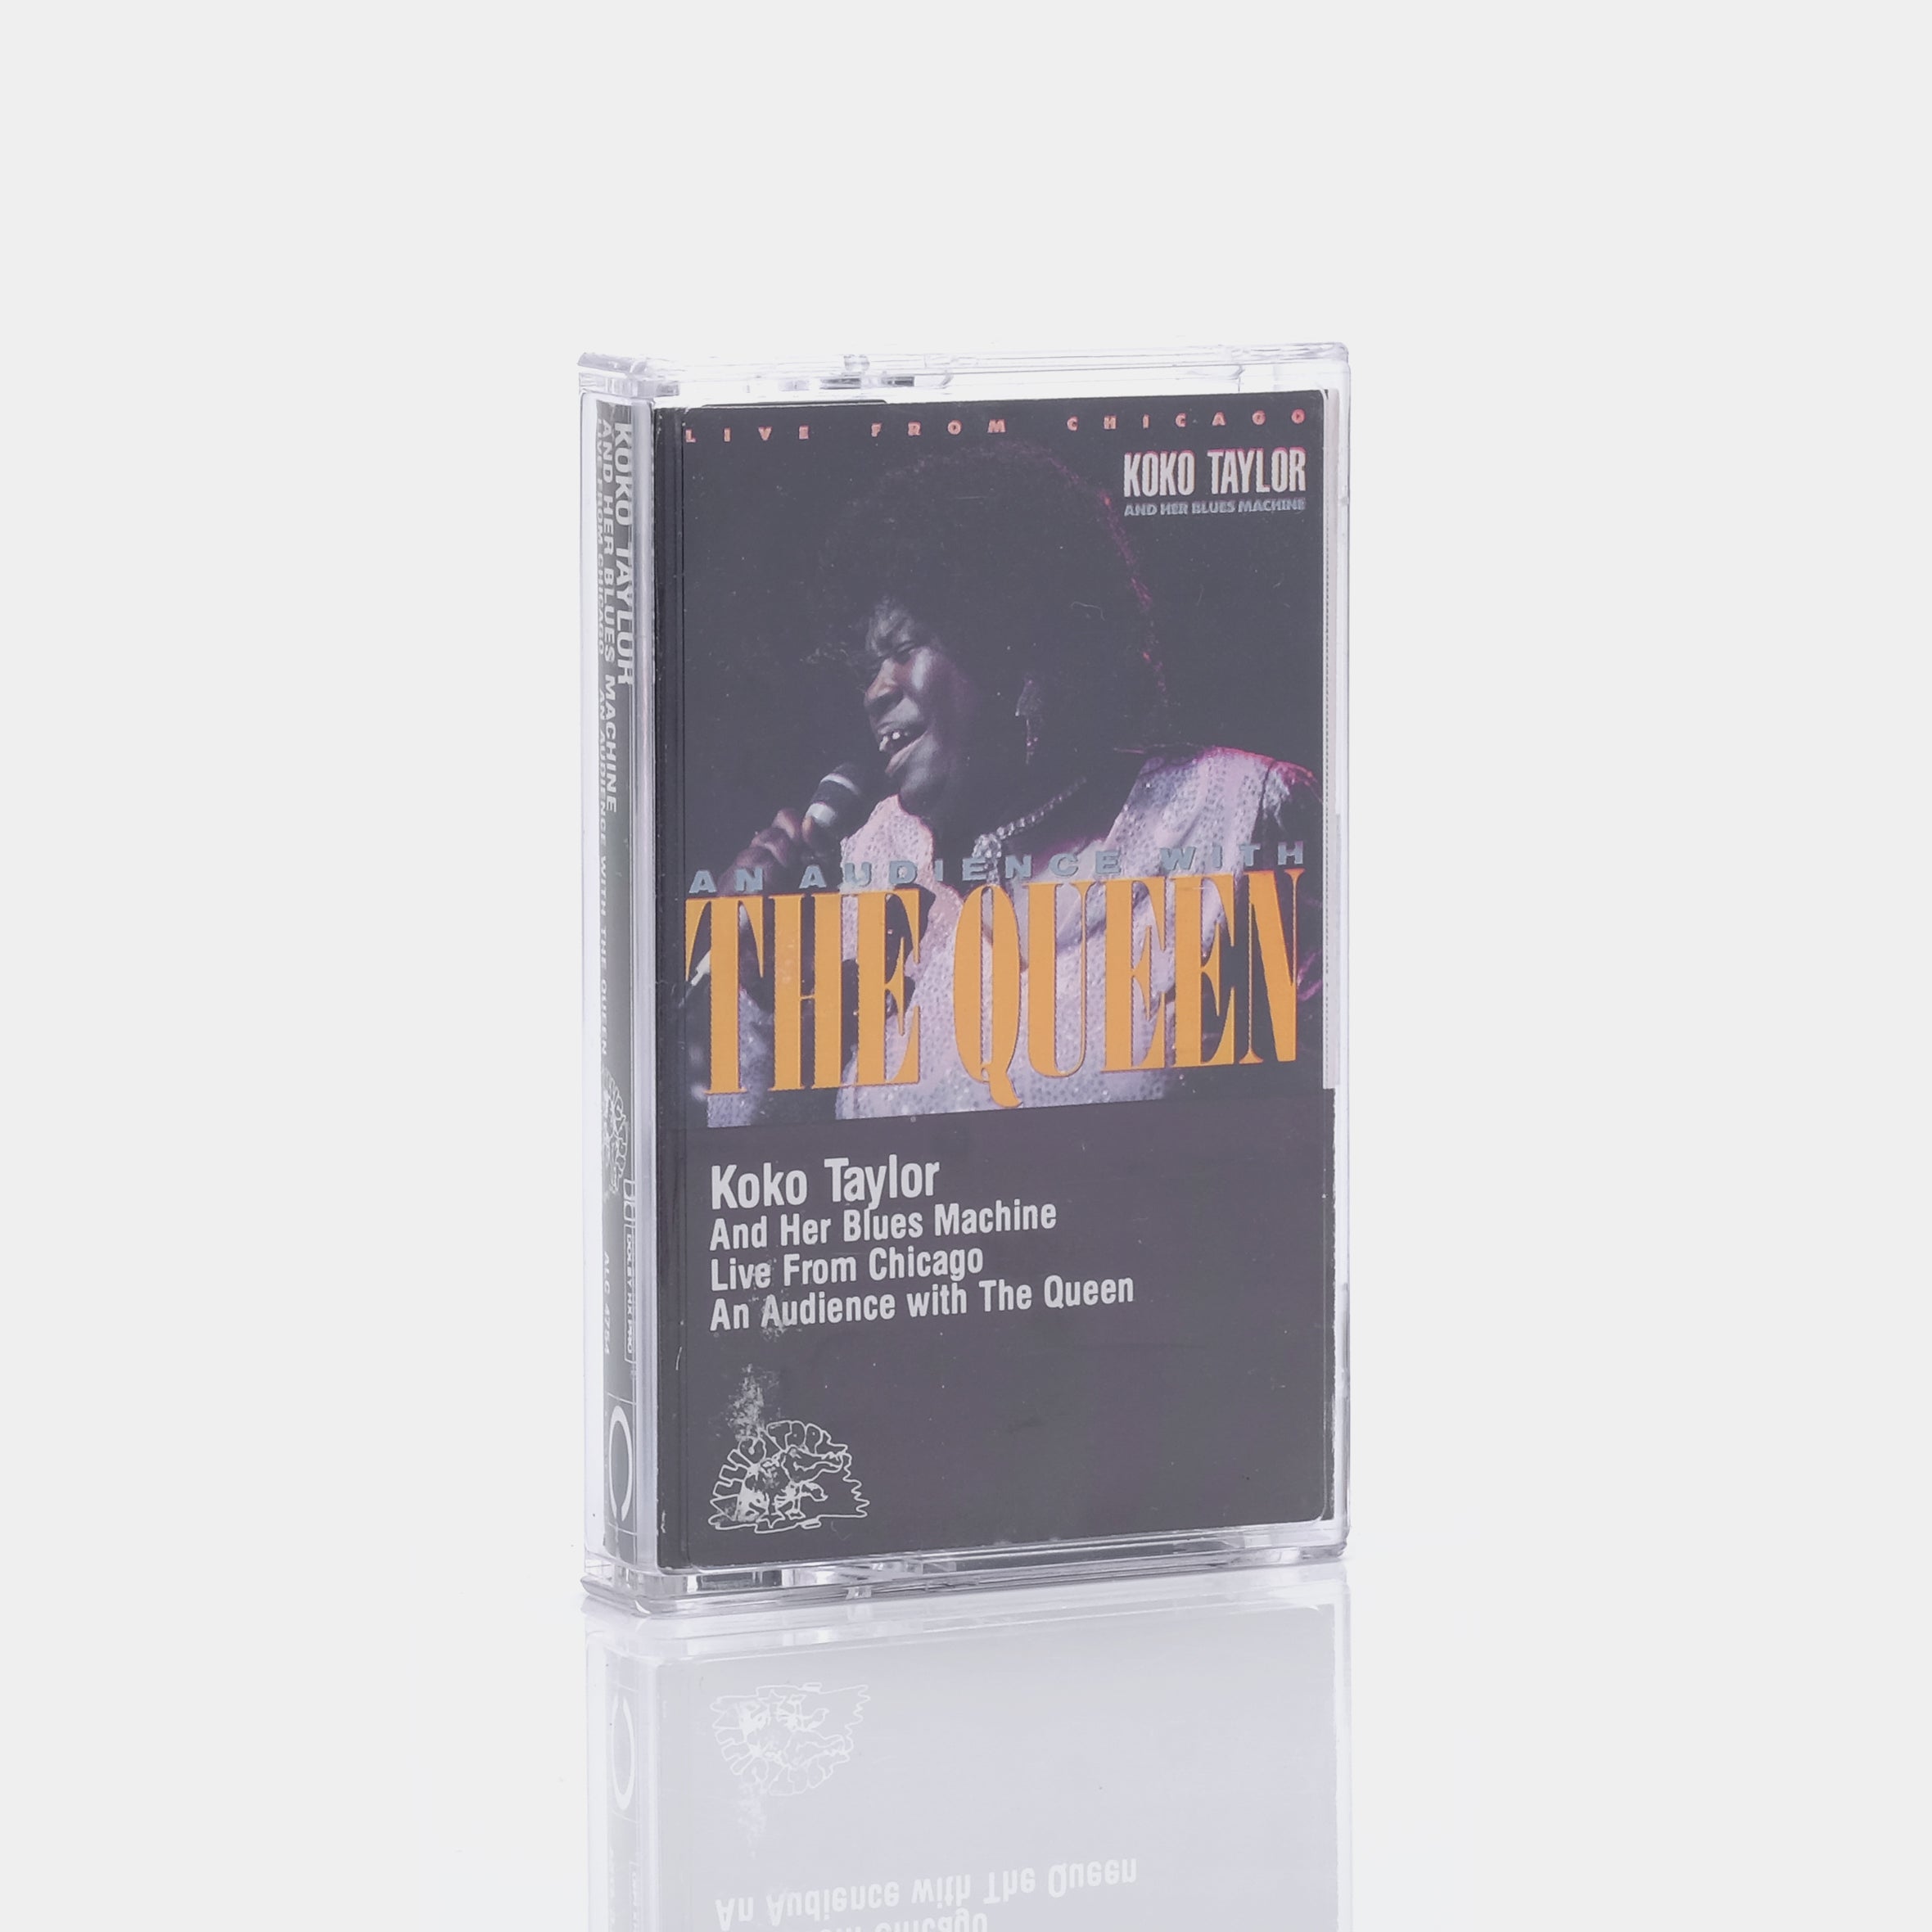 Koko Taylor And Her Blues Machine - An Audience With The Queen Cassette Tape